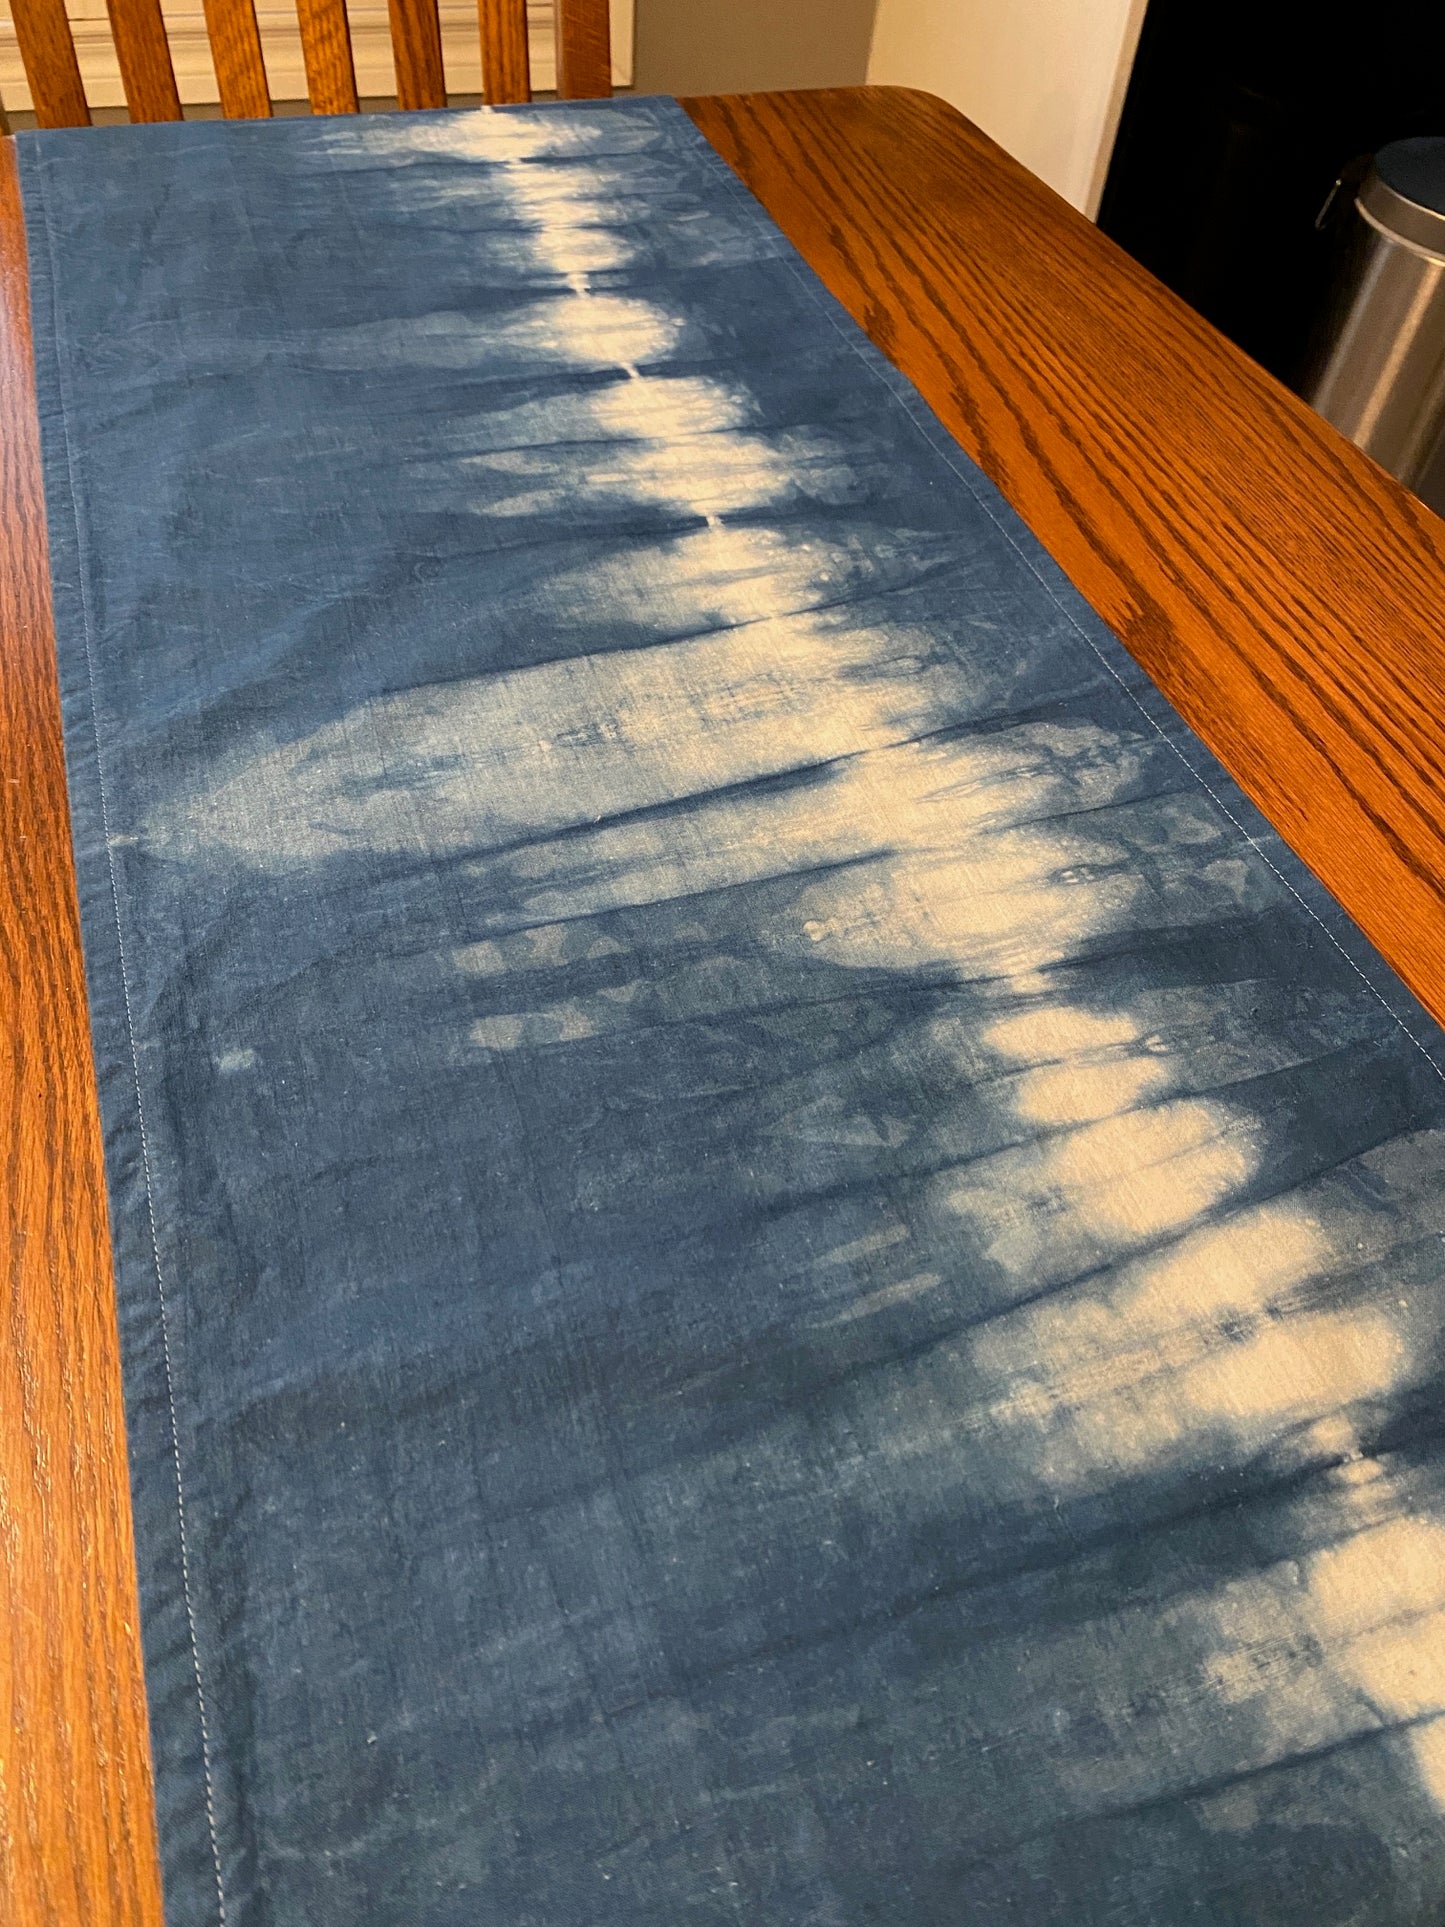 Vintage Upcycled Table Runner